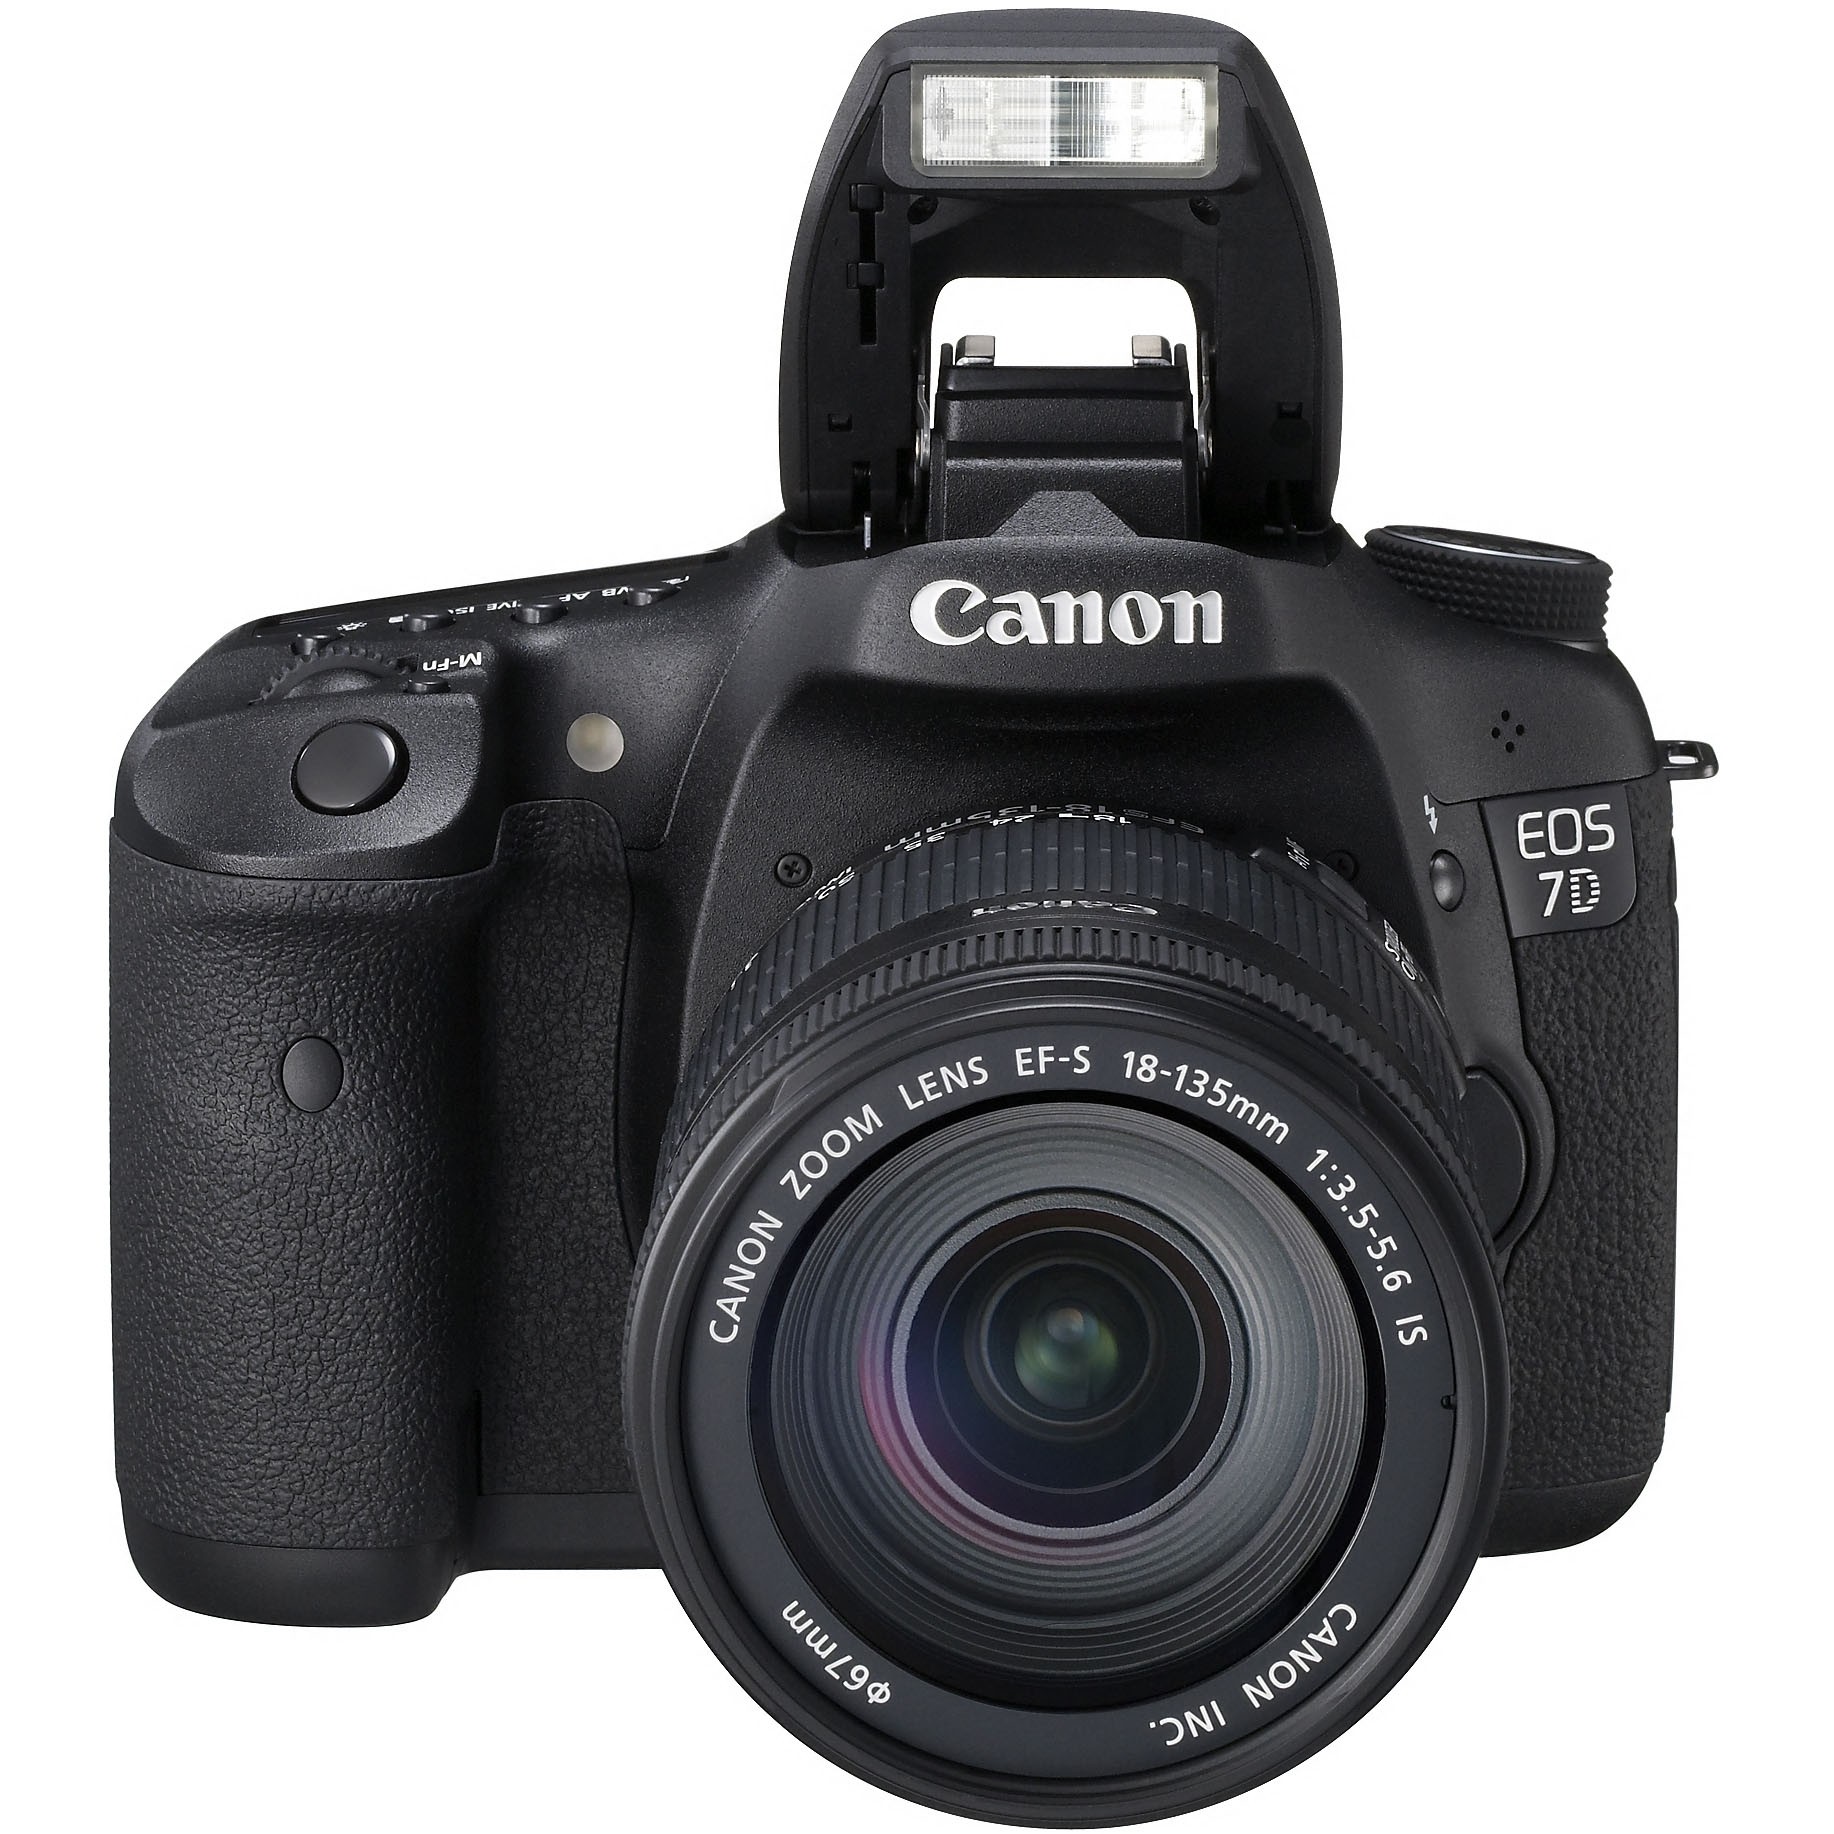 Best Buy: Canon EOS 7D DSLR Camera with 18-135mm IS Lens Black